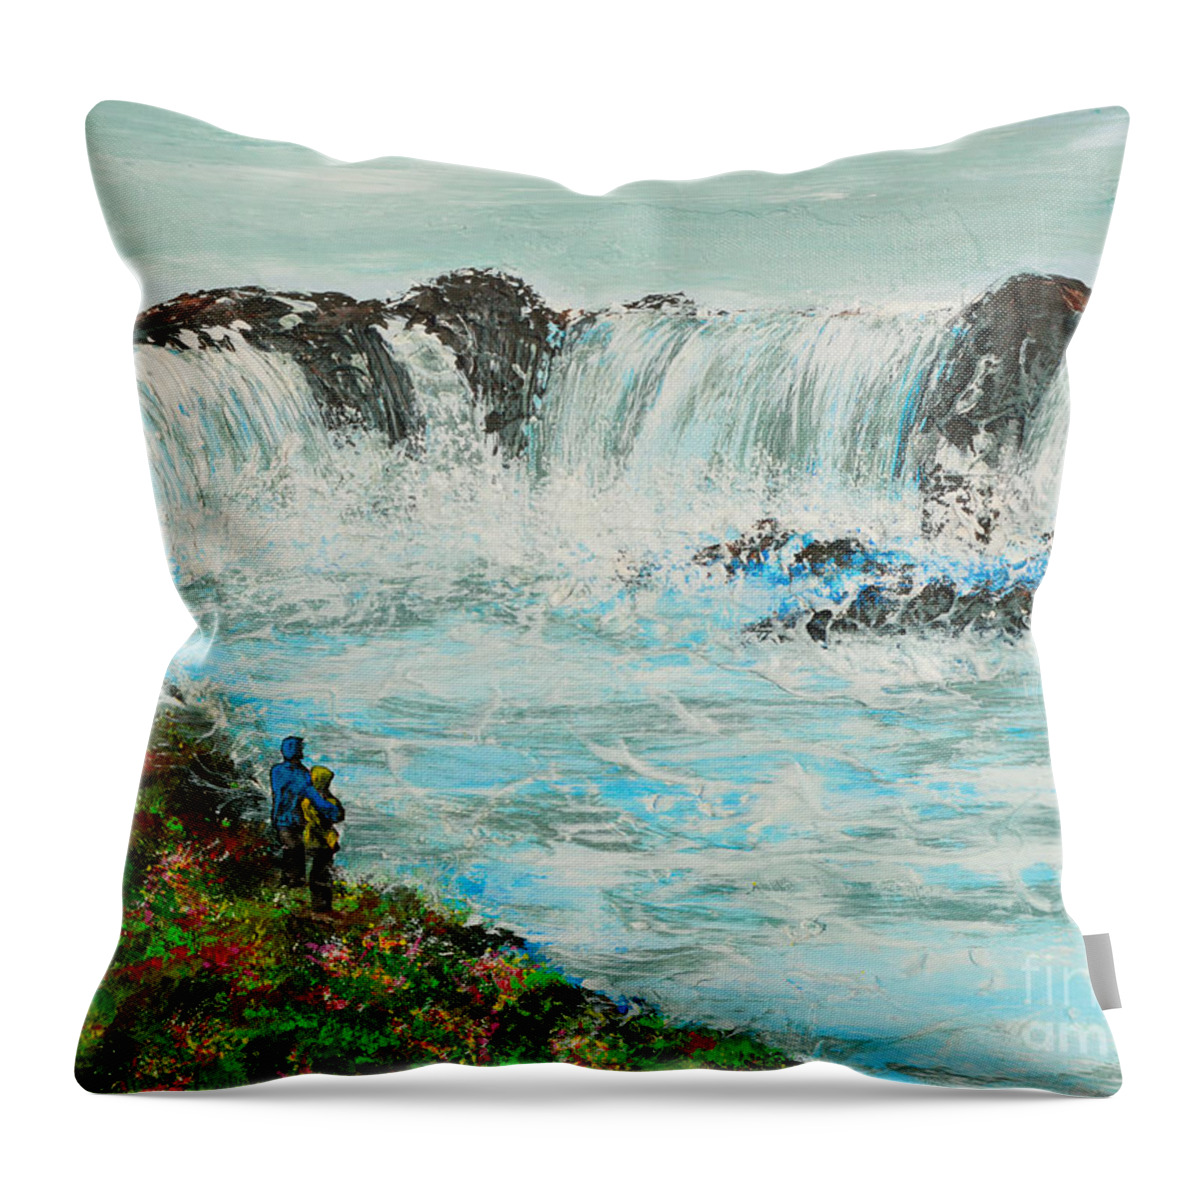 Waterfall Throw Pillow featuring the painting Honeymoon At Godafoss by Alys Caviness-Gober